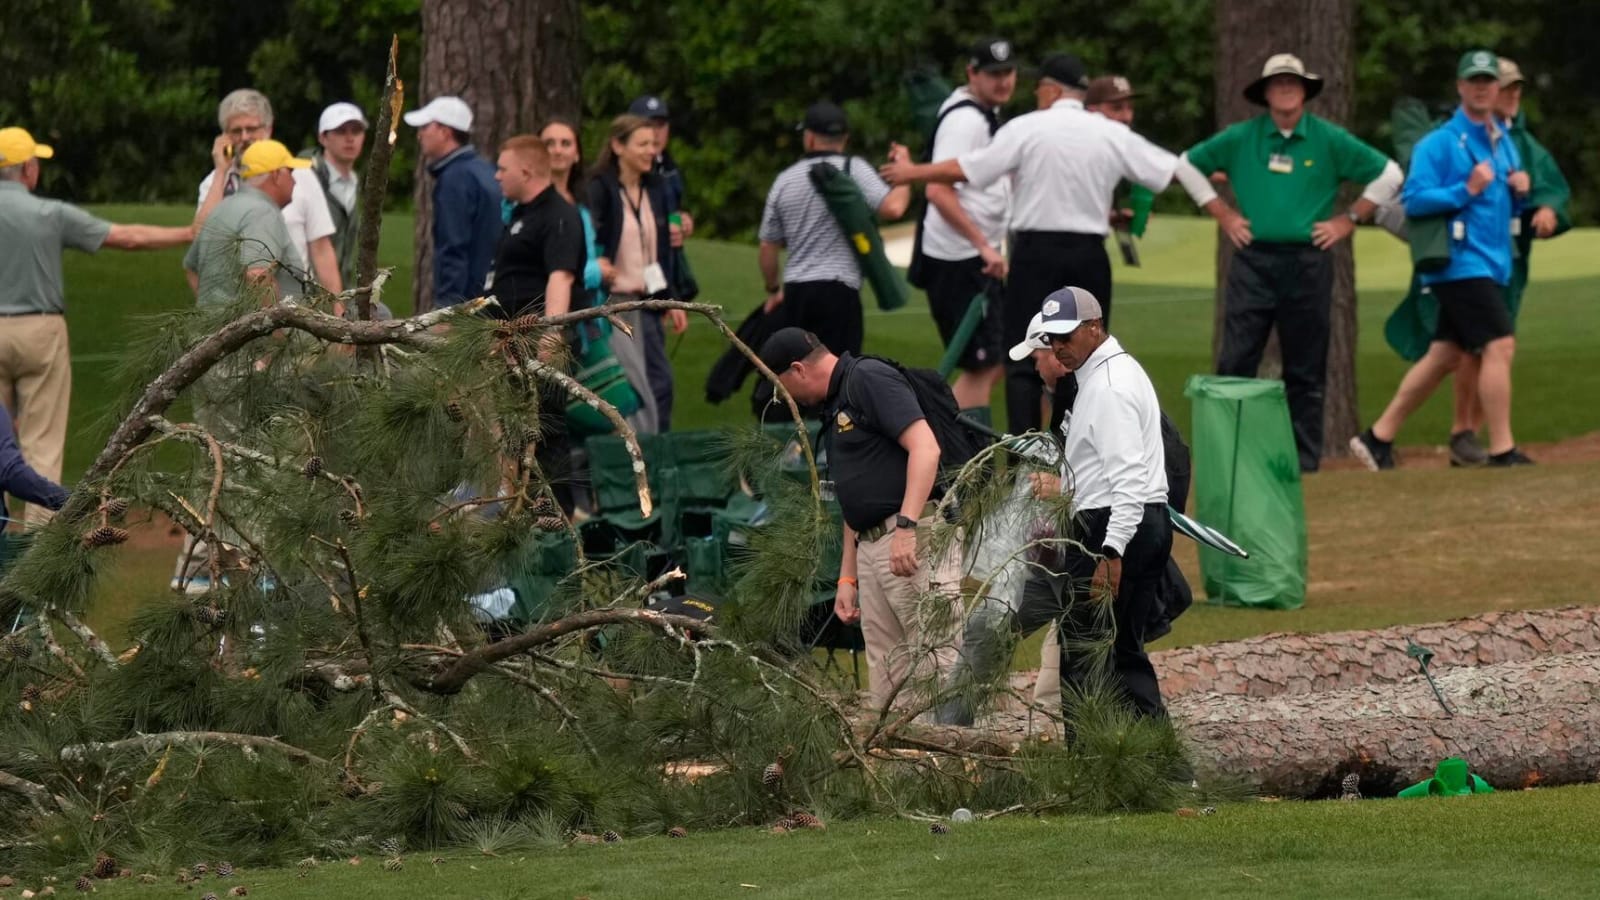 Tree nearly falls on spectators at Masters in scary incident Yardbarker